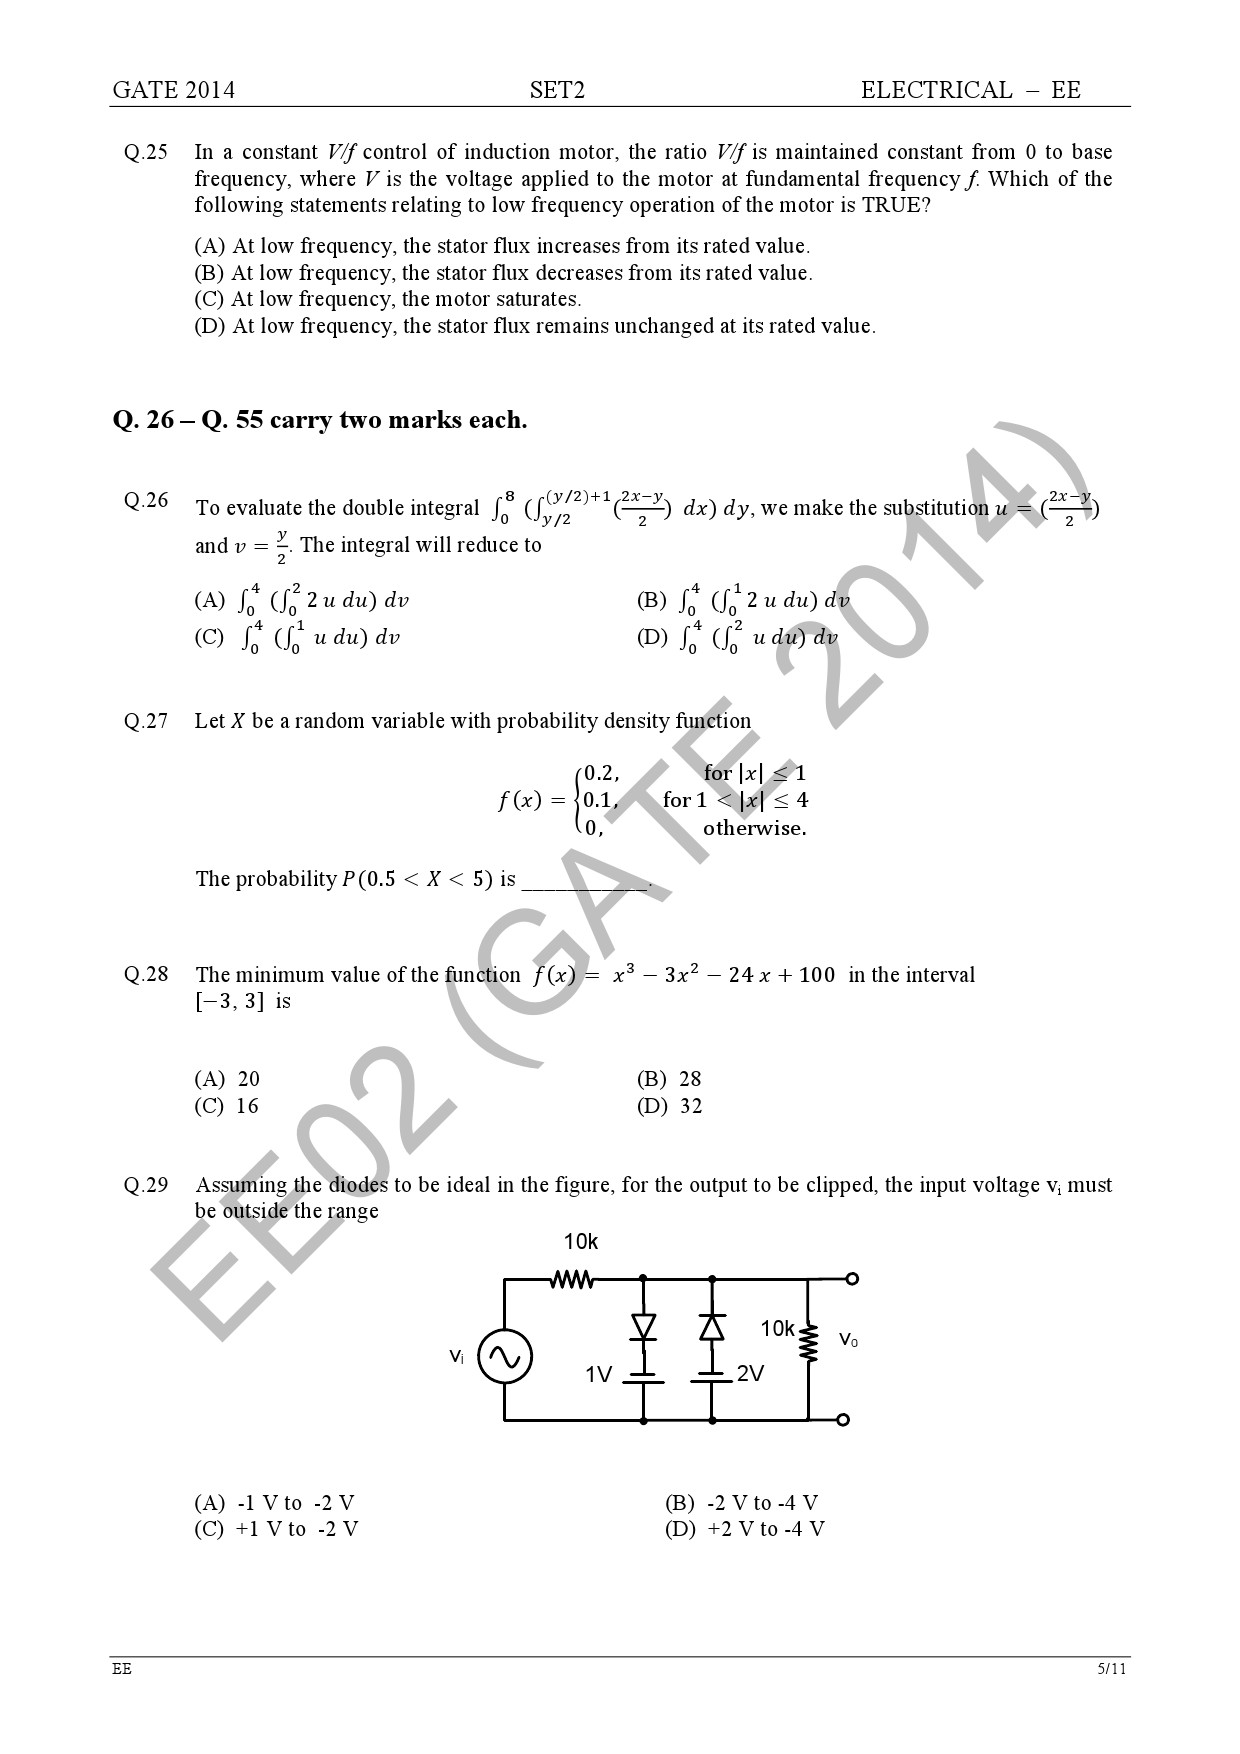 GATE Exam Question Paper 2014 Electrical Engineering Set 2 11